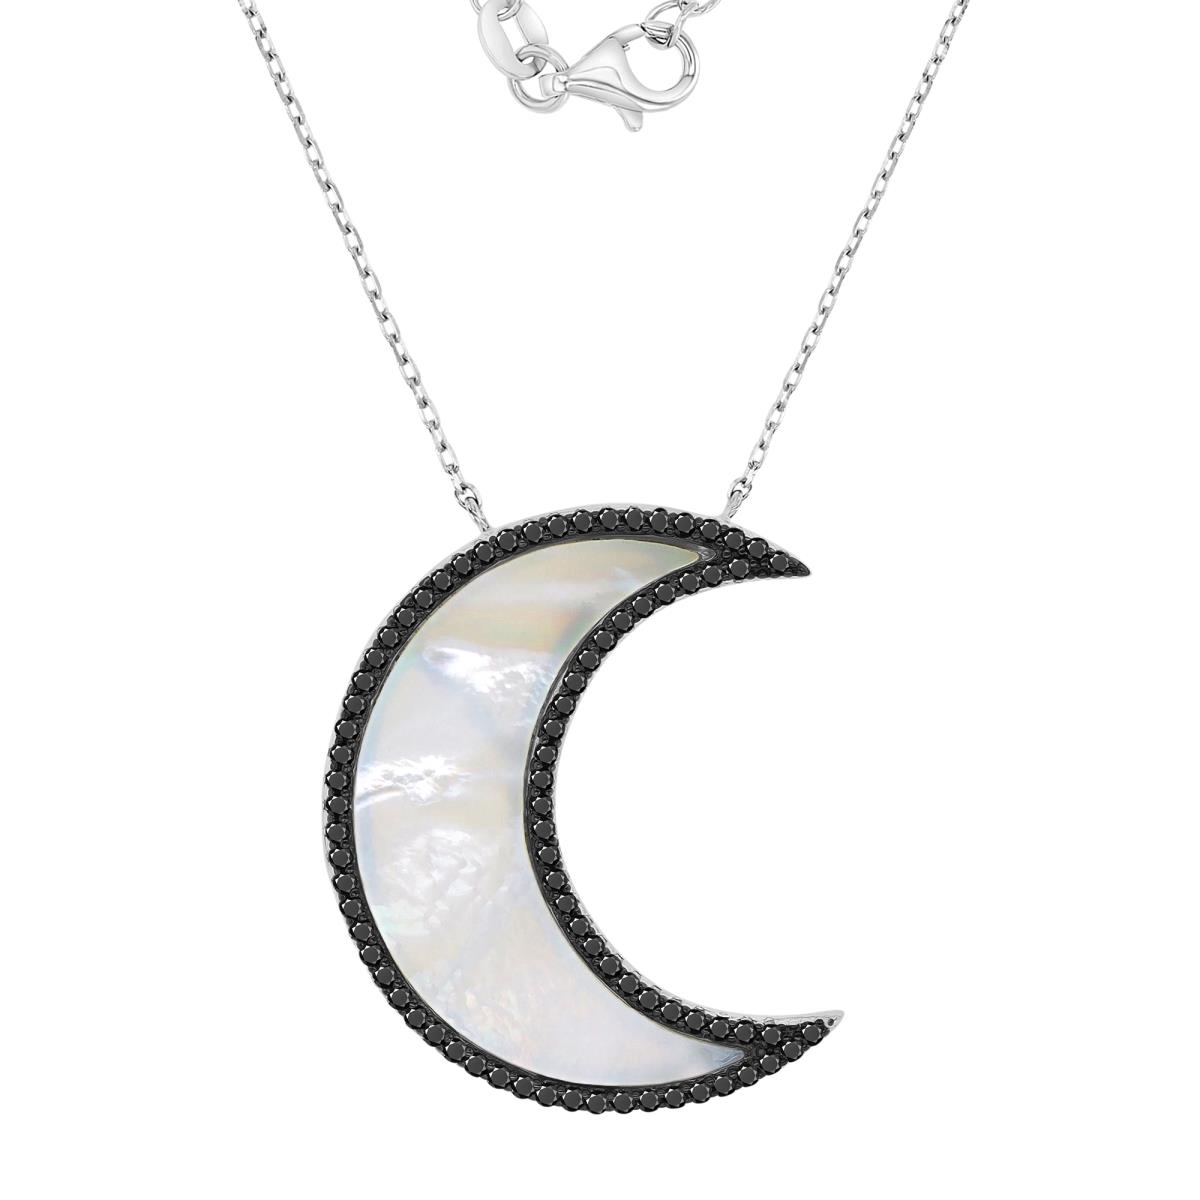 Sterling Silver Black & White 25.7x31mm Black Spinel & White MOP Half Moon 16+2" Necklace